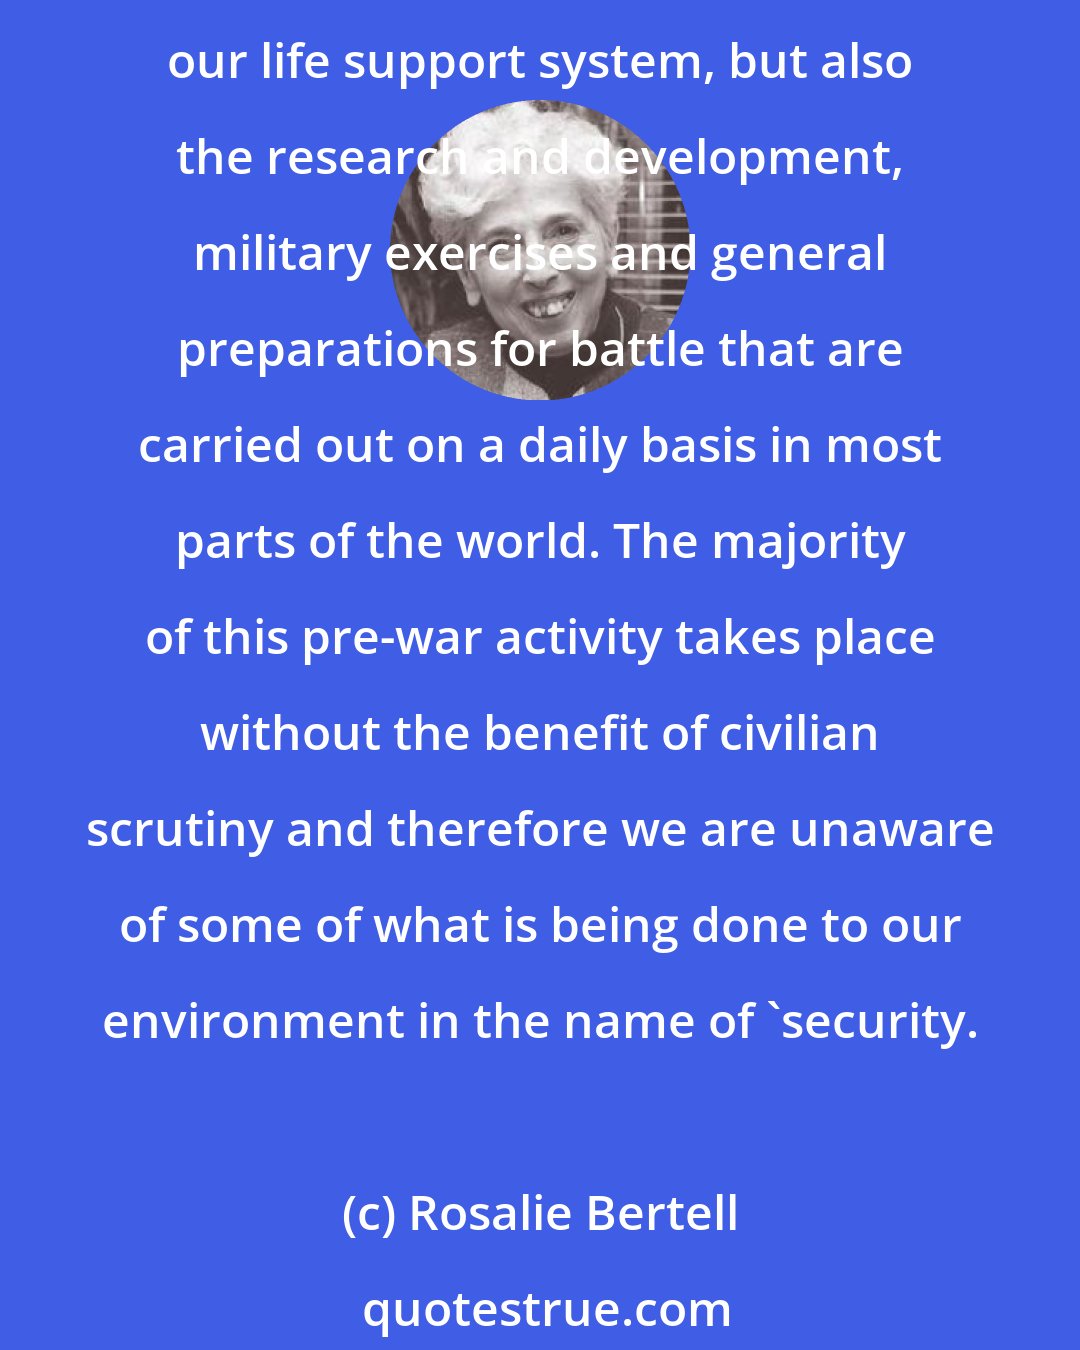 Rosalie Bertell: Wars results in immediate deaths and destruction, but the environmental consequences can last hundreds, often thousands of years. And it is not just war itself that undermines our life support system, but also the research and development, military exercises and general preparations for battle that are carried out on a daily basis in most parts of the world. The majority of this pre-war activity takes place without the benefit of civilian scrutiny and therefore we are unaware of some of what is being done to our environment in the name of 'security.